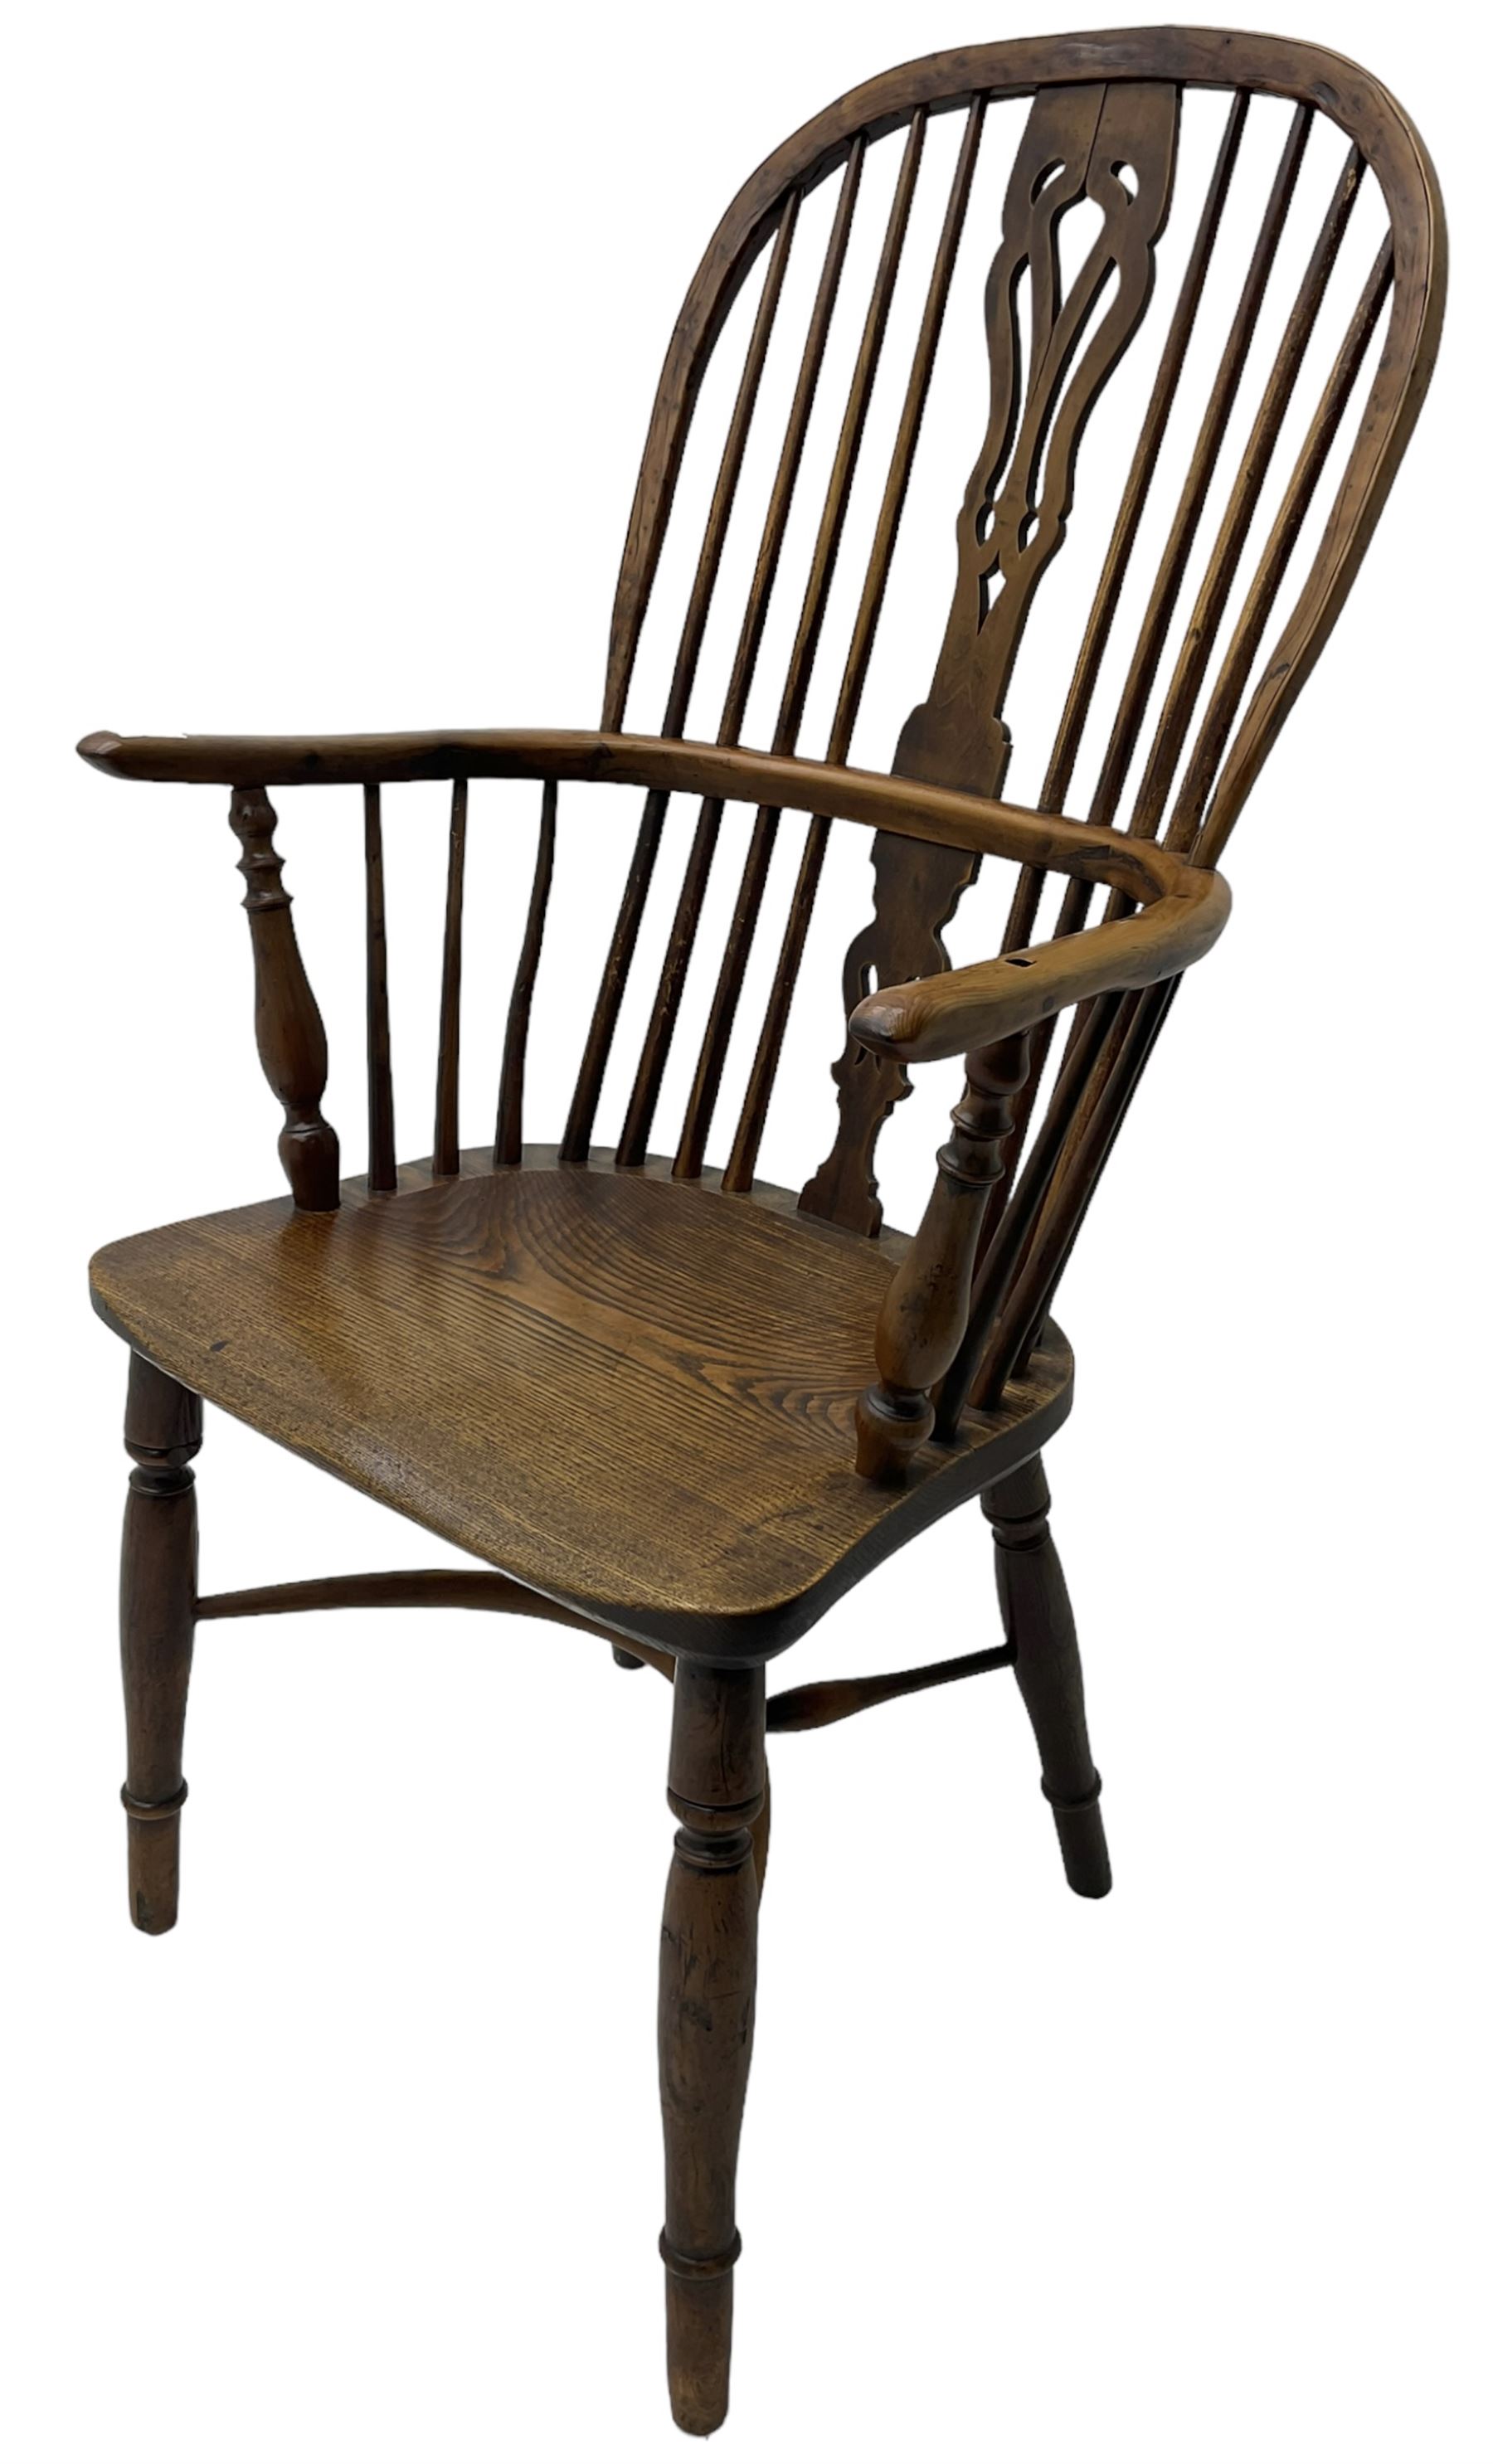 19th century yew wood and elm Windsor chair - Image 2 of 7